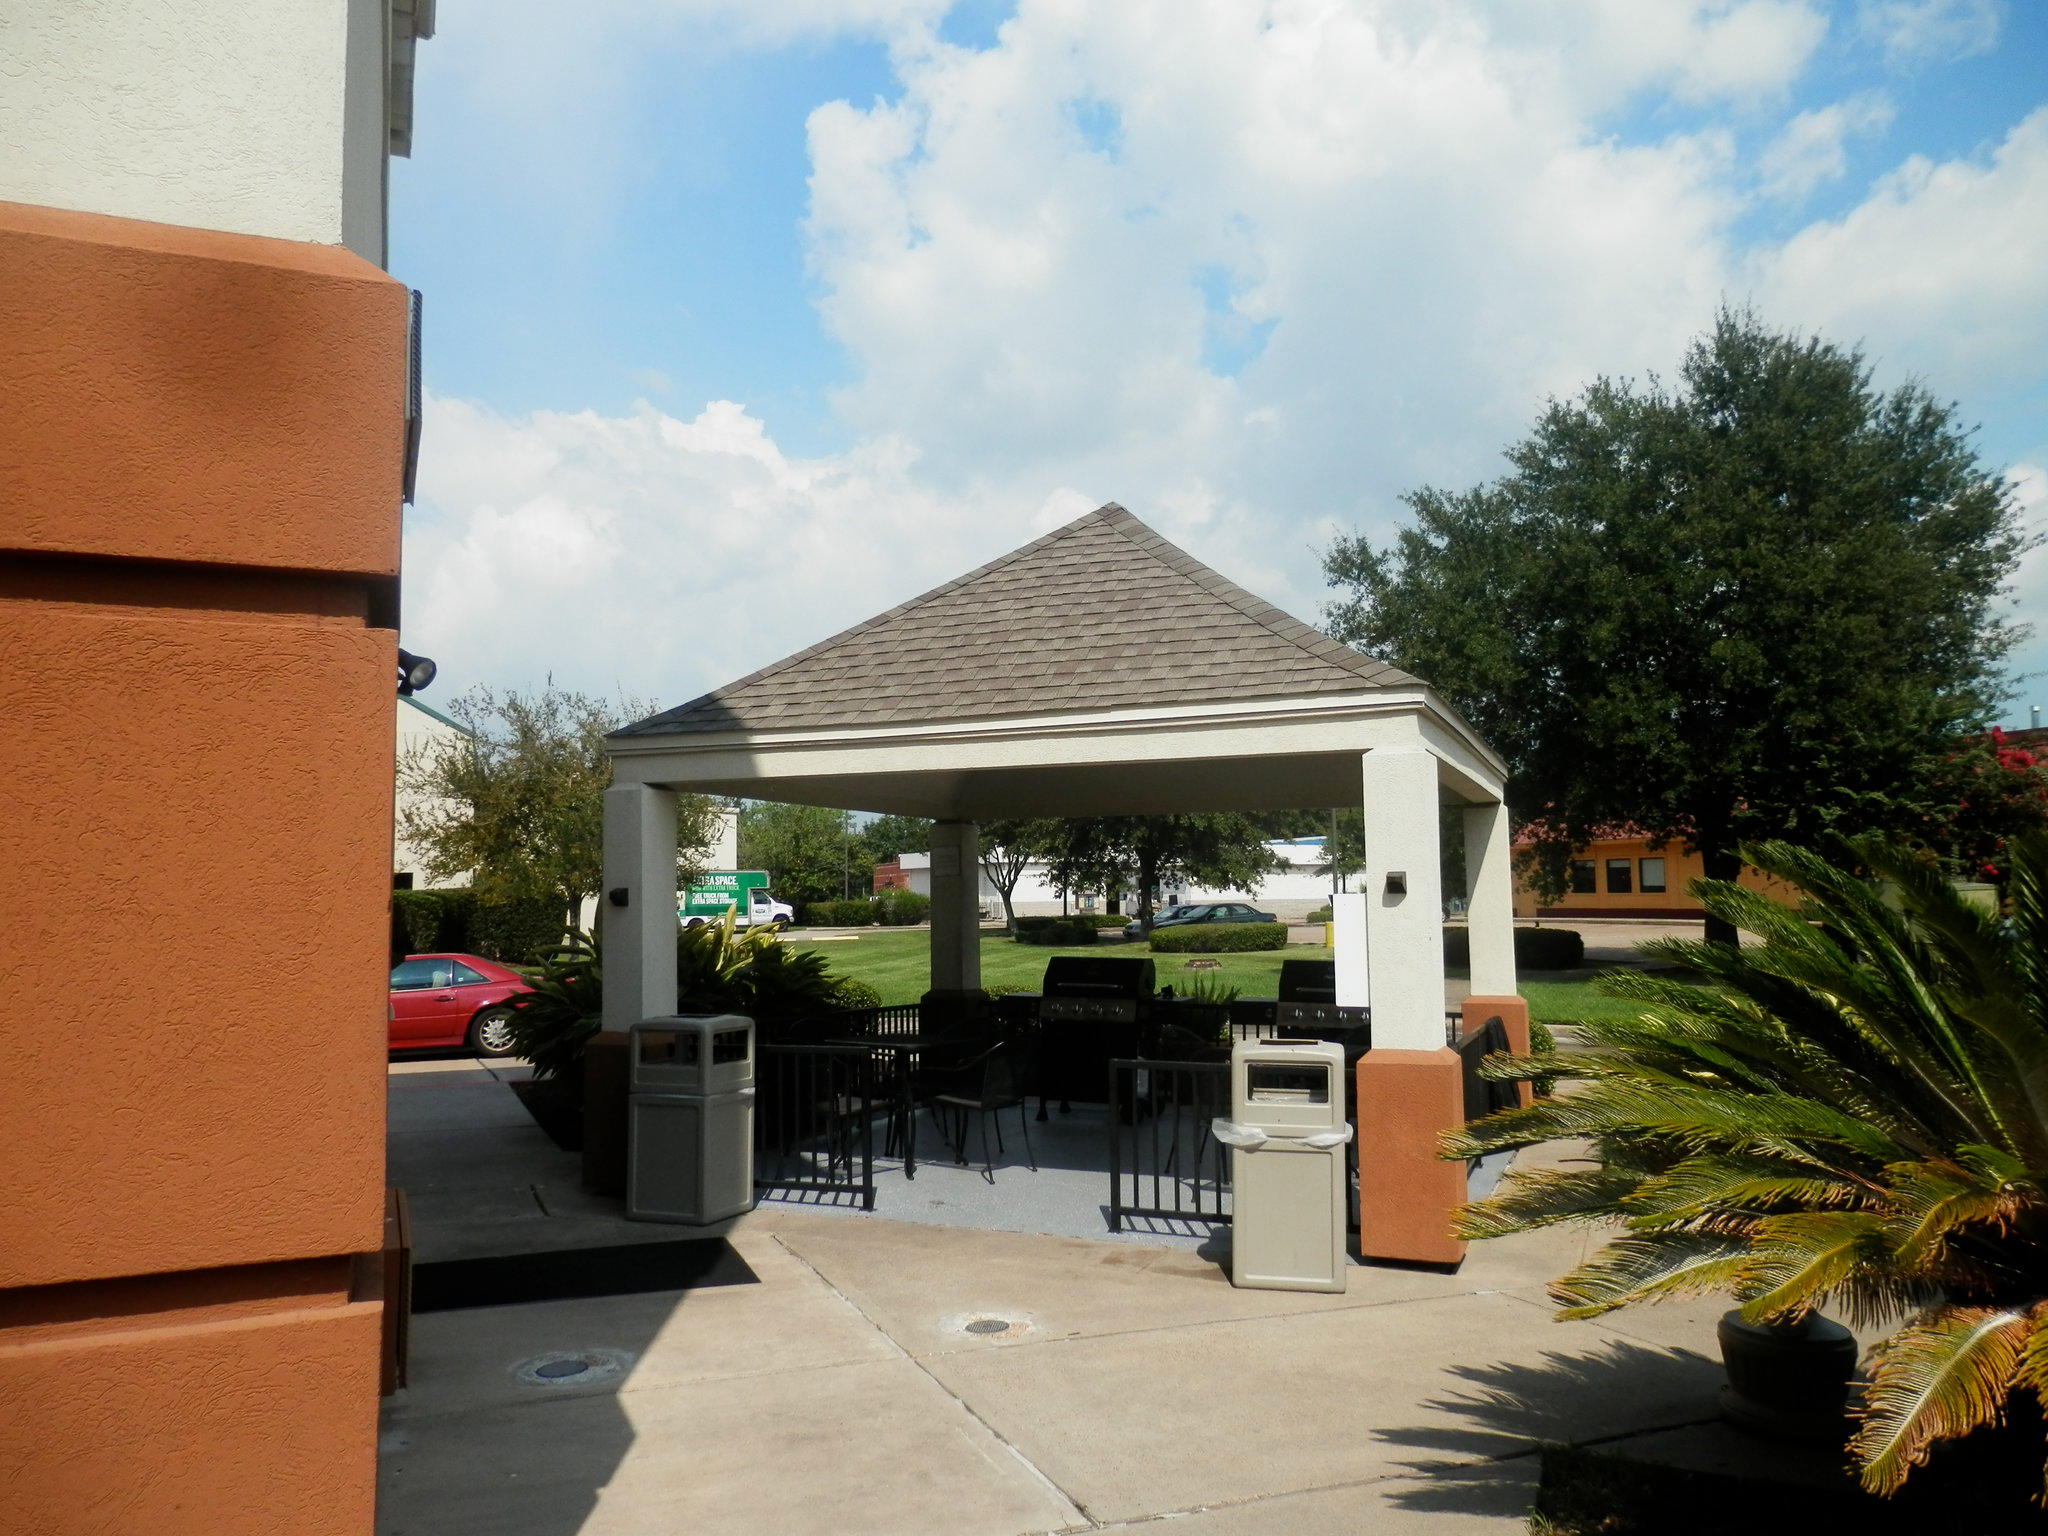 Candlewood Suites Houston-Clear Lake Photo